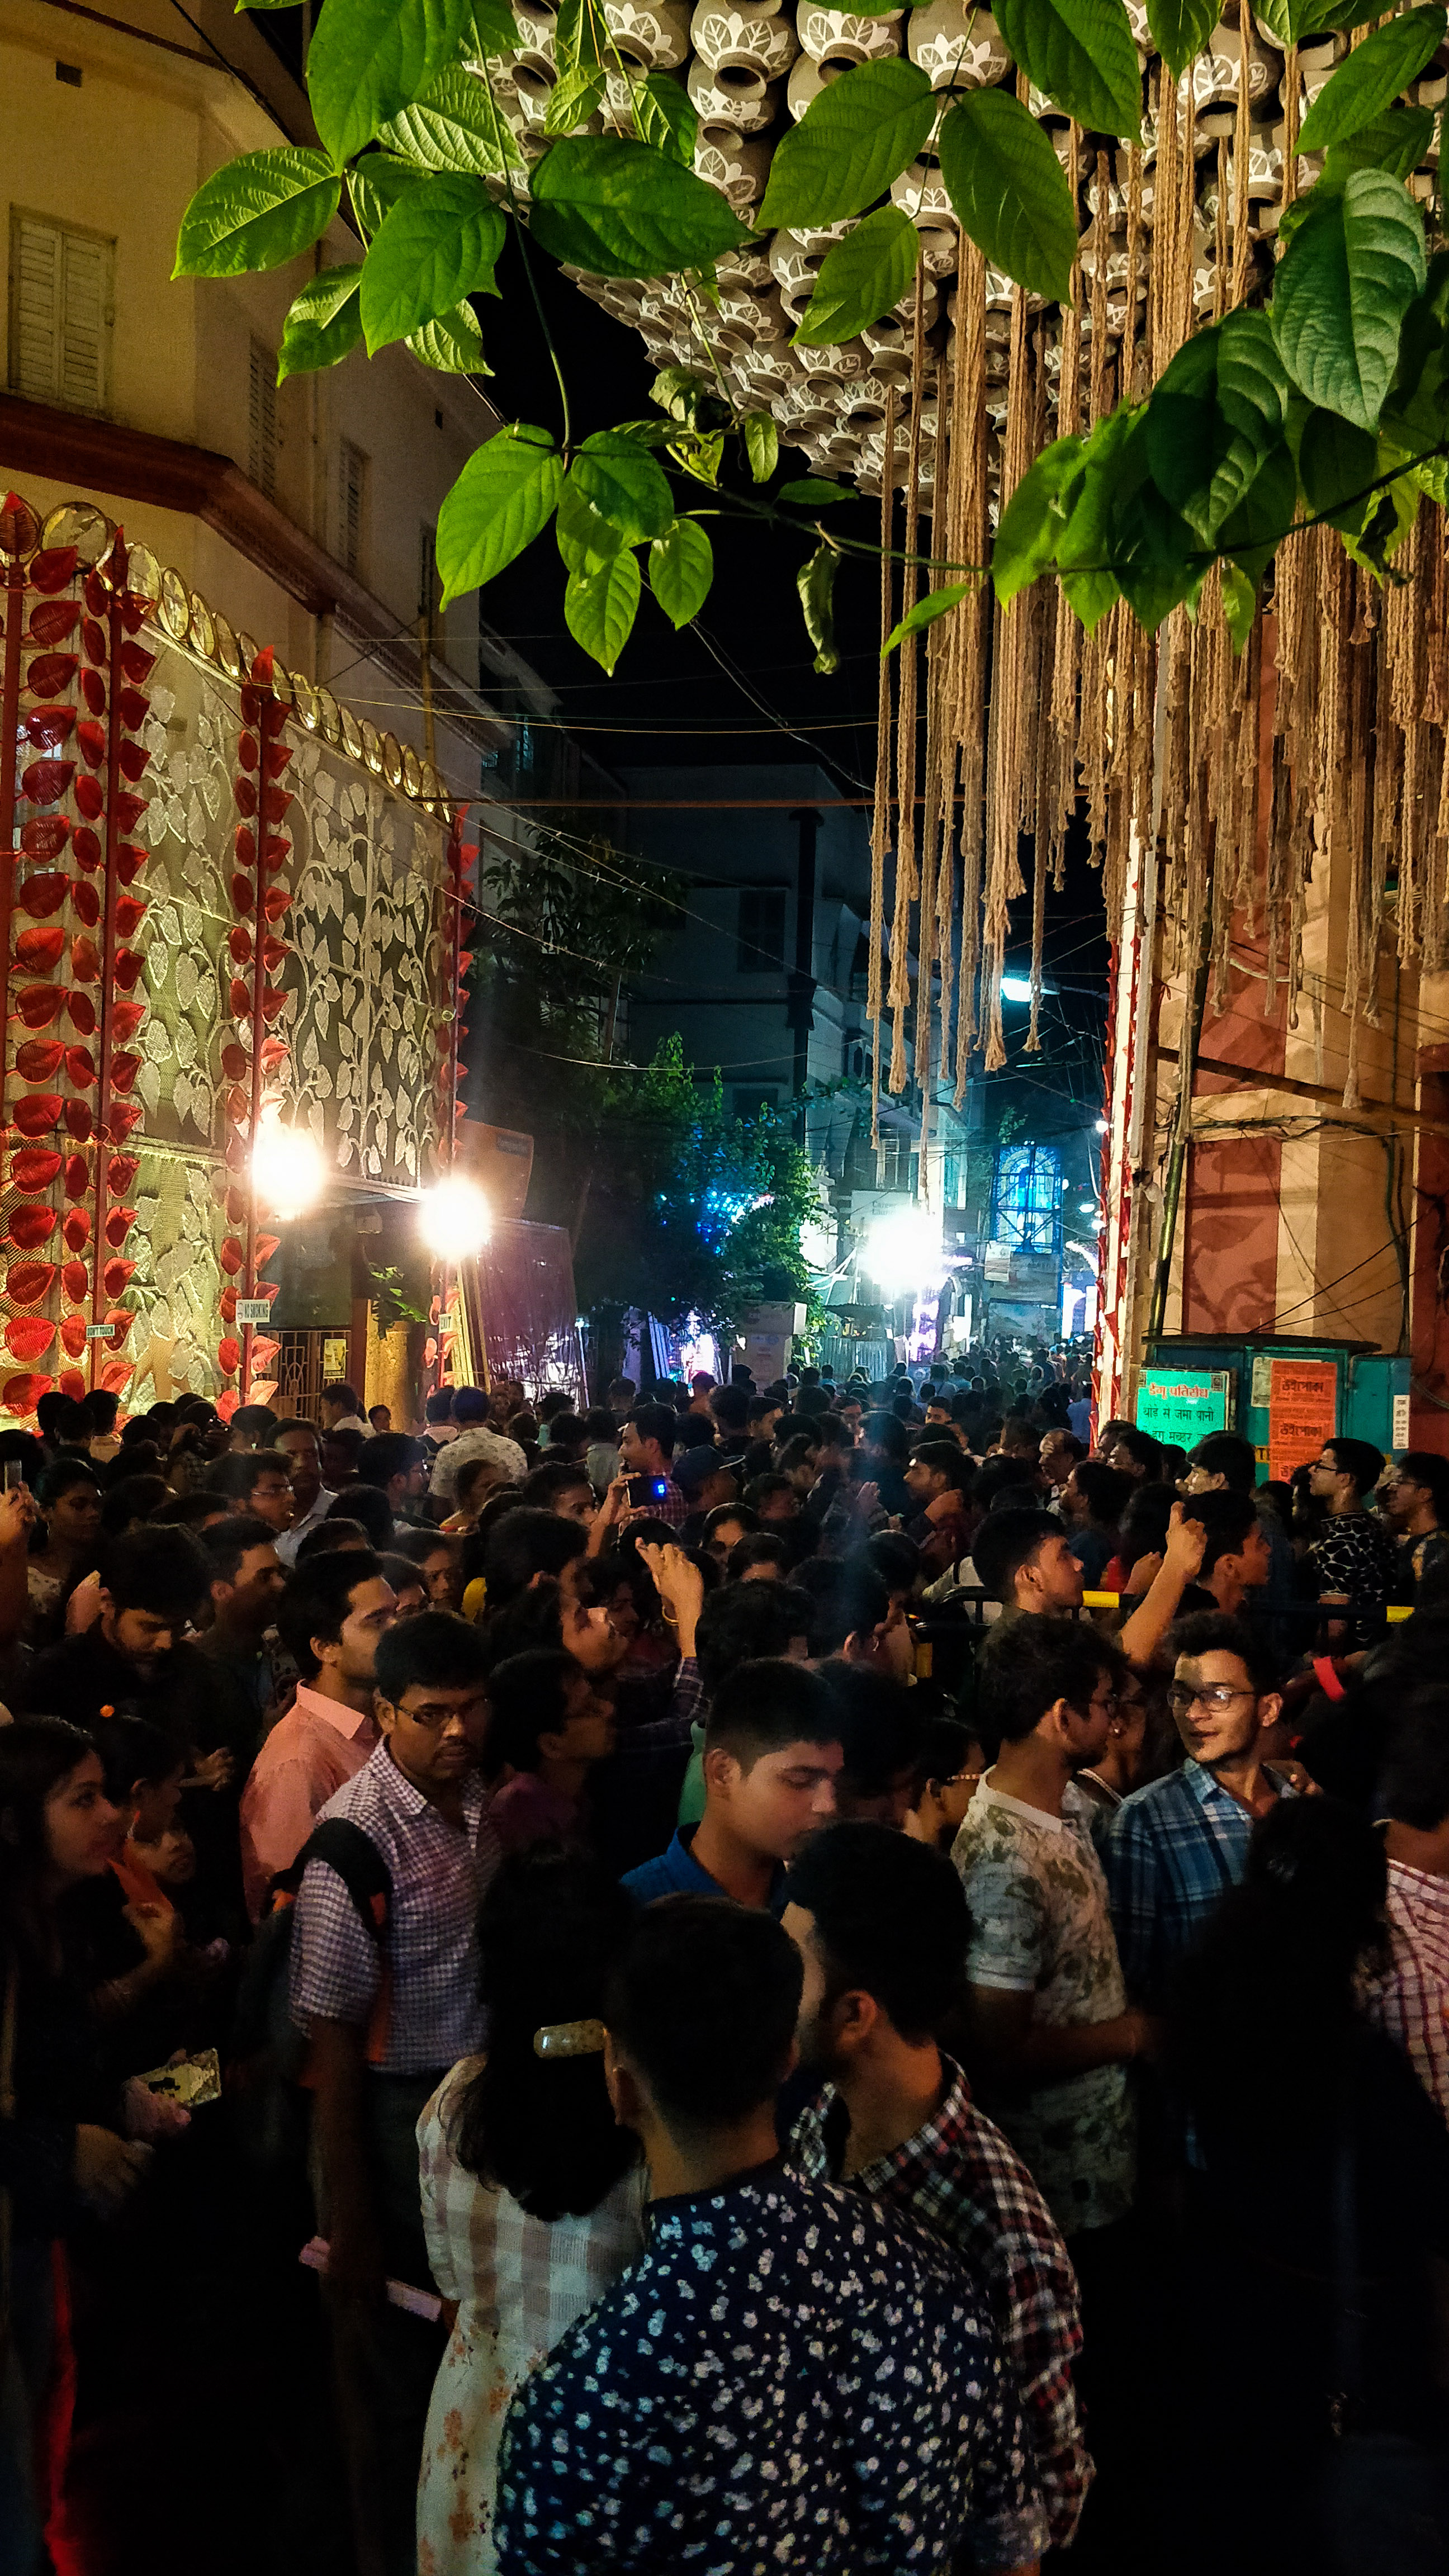 Streets are filled with throngs of people visiting different pandals